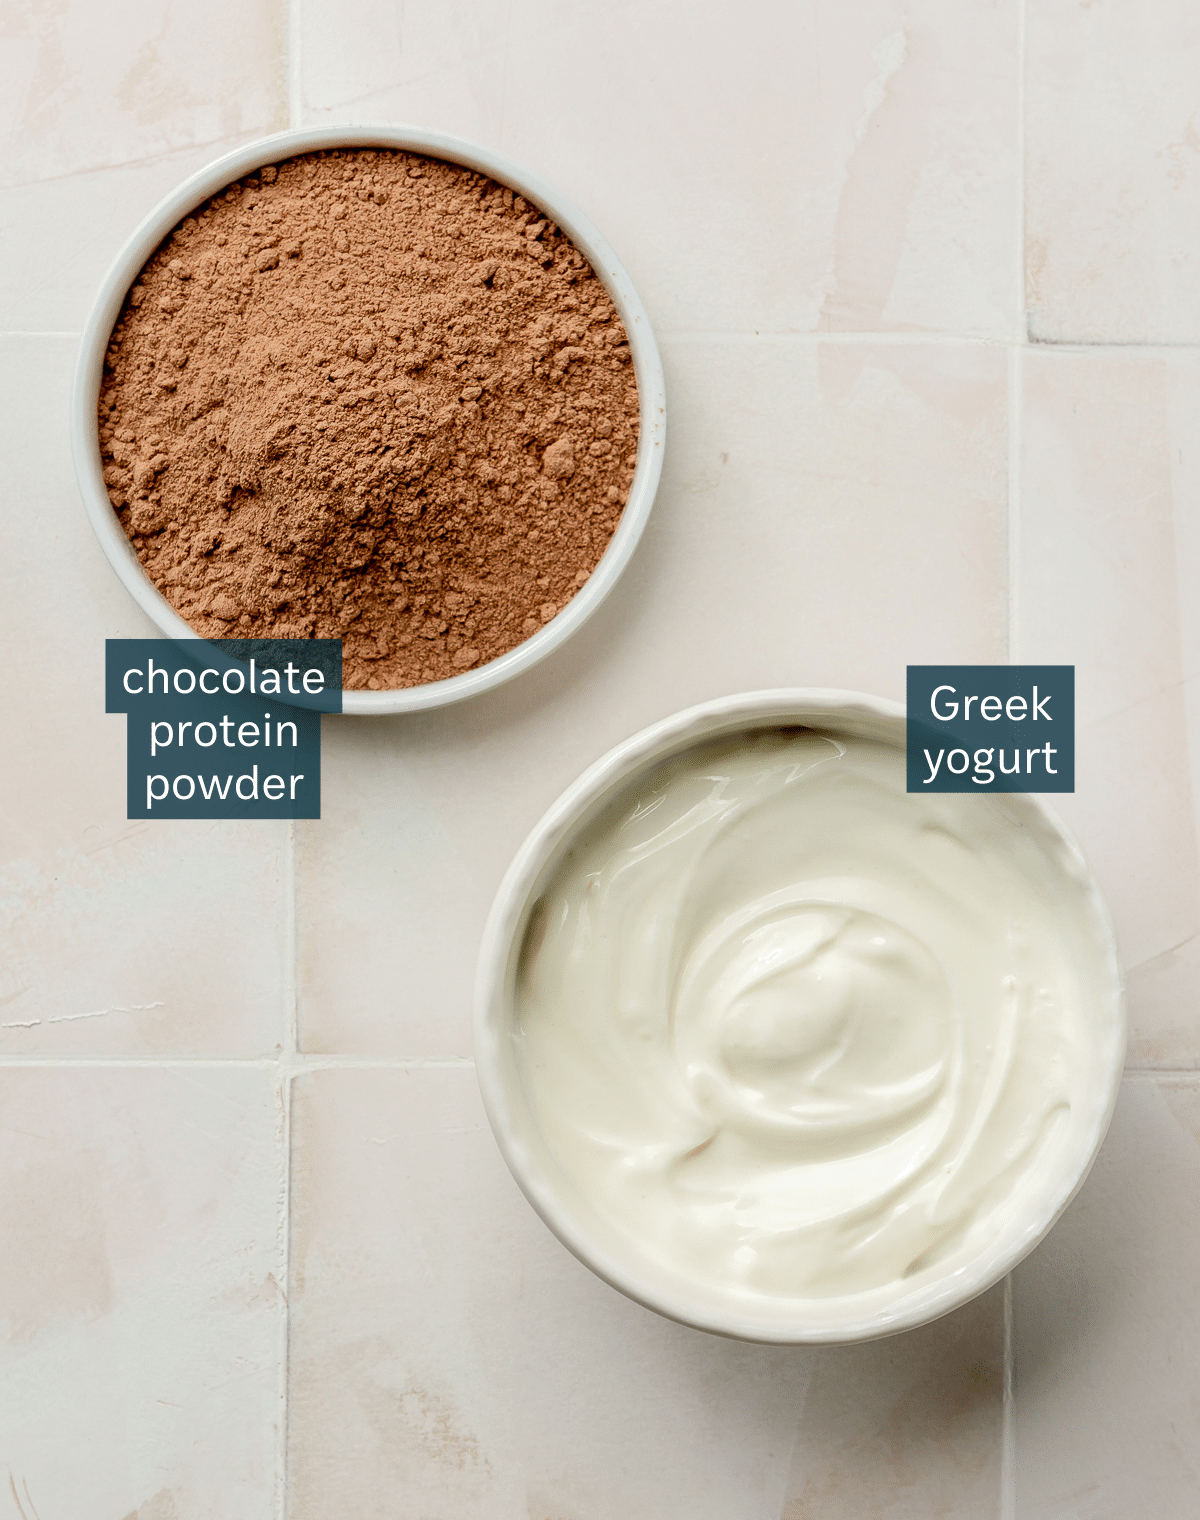 Ingredients for chocolate protein pudding sit in two different bowls on a white tiled countertop.